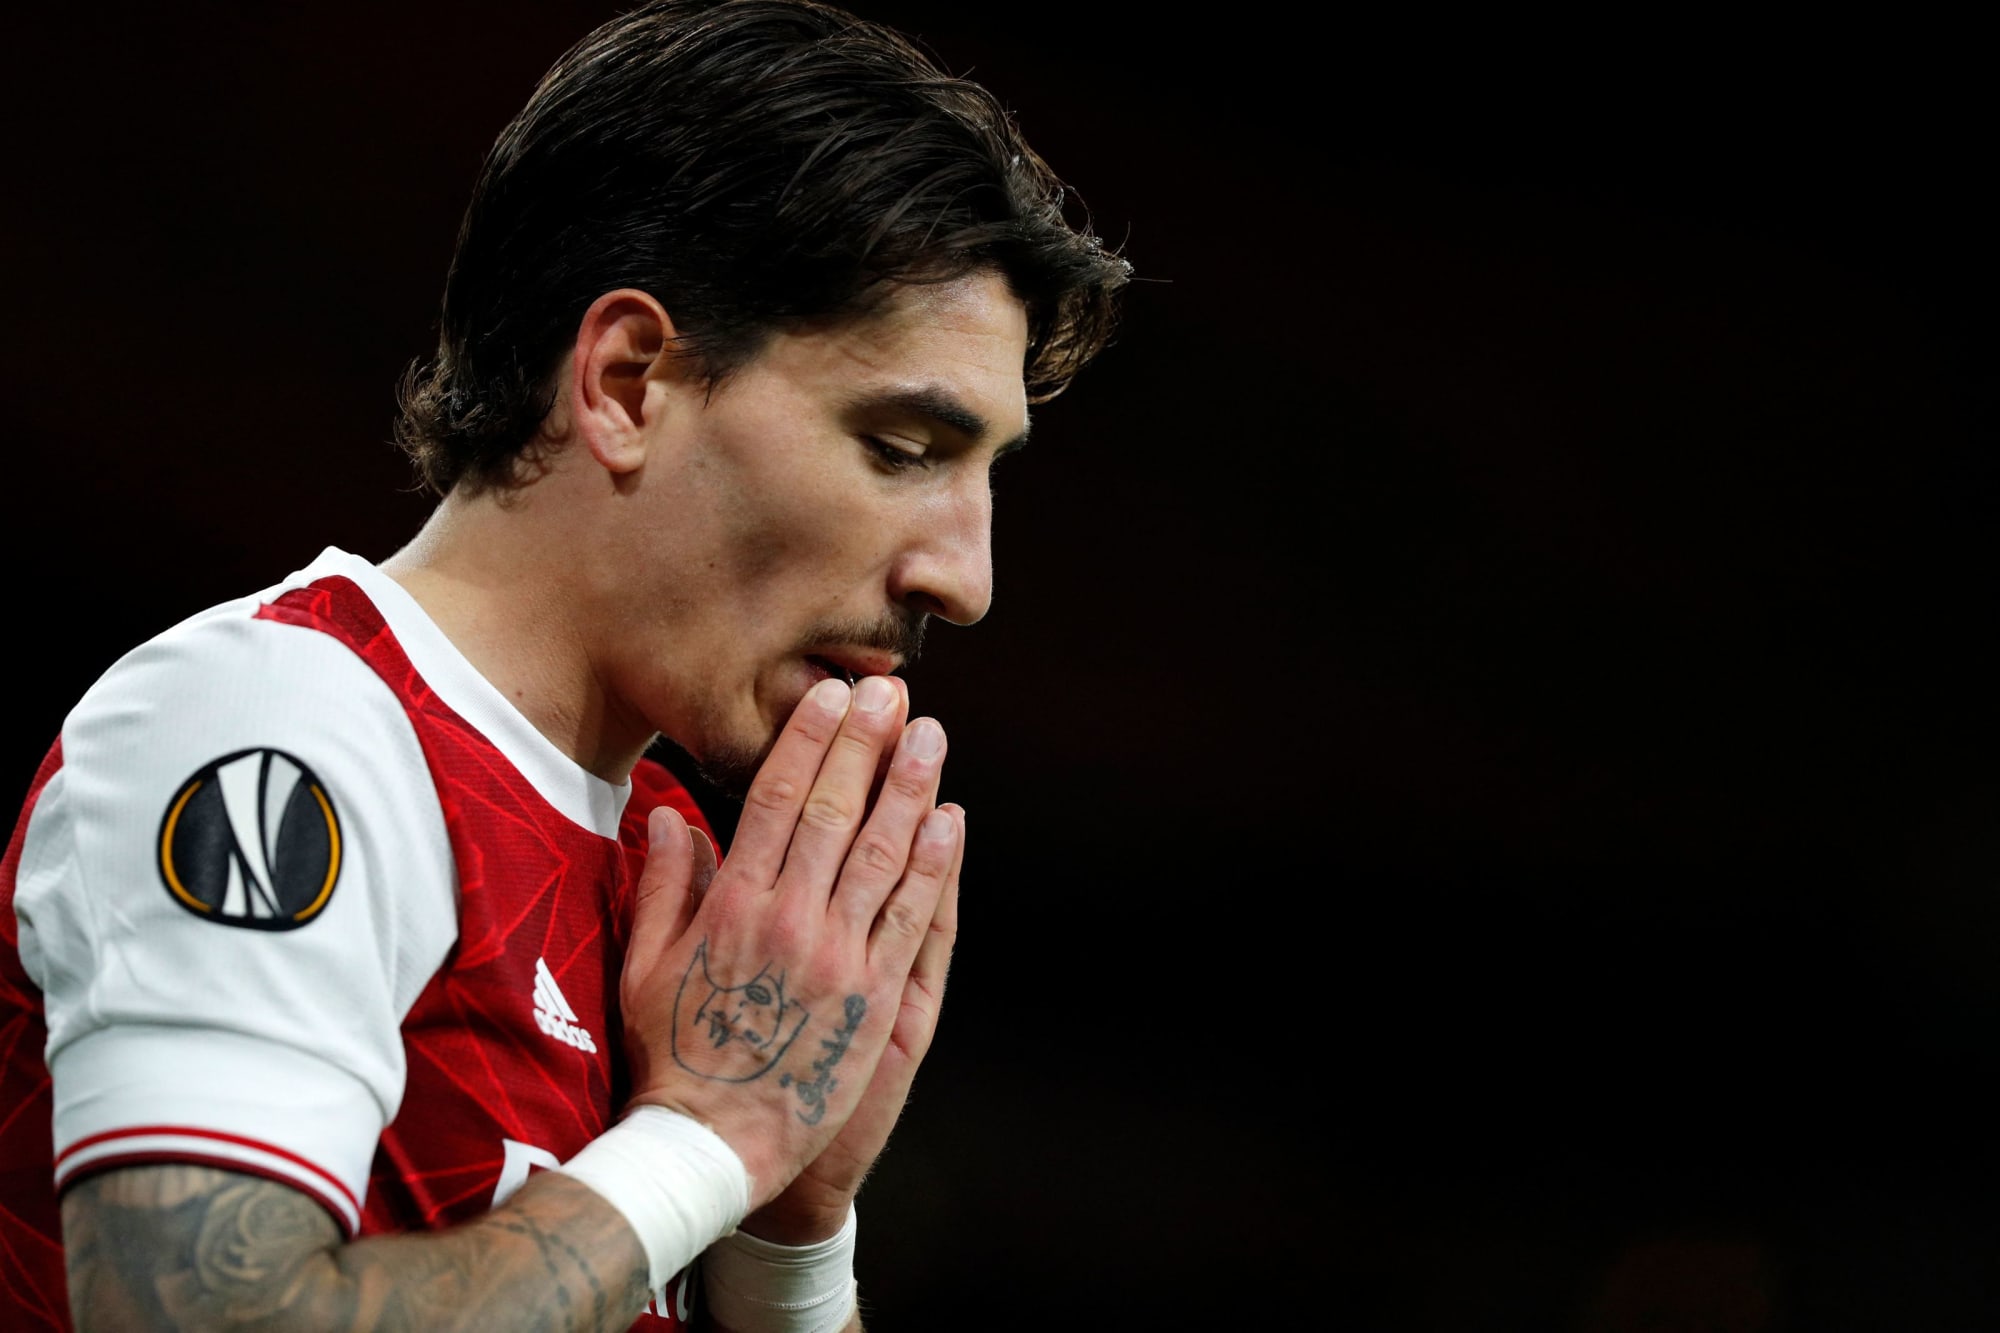 Hector Bellerin has decided where he will play next season